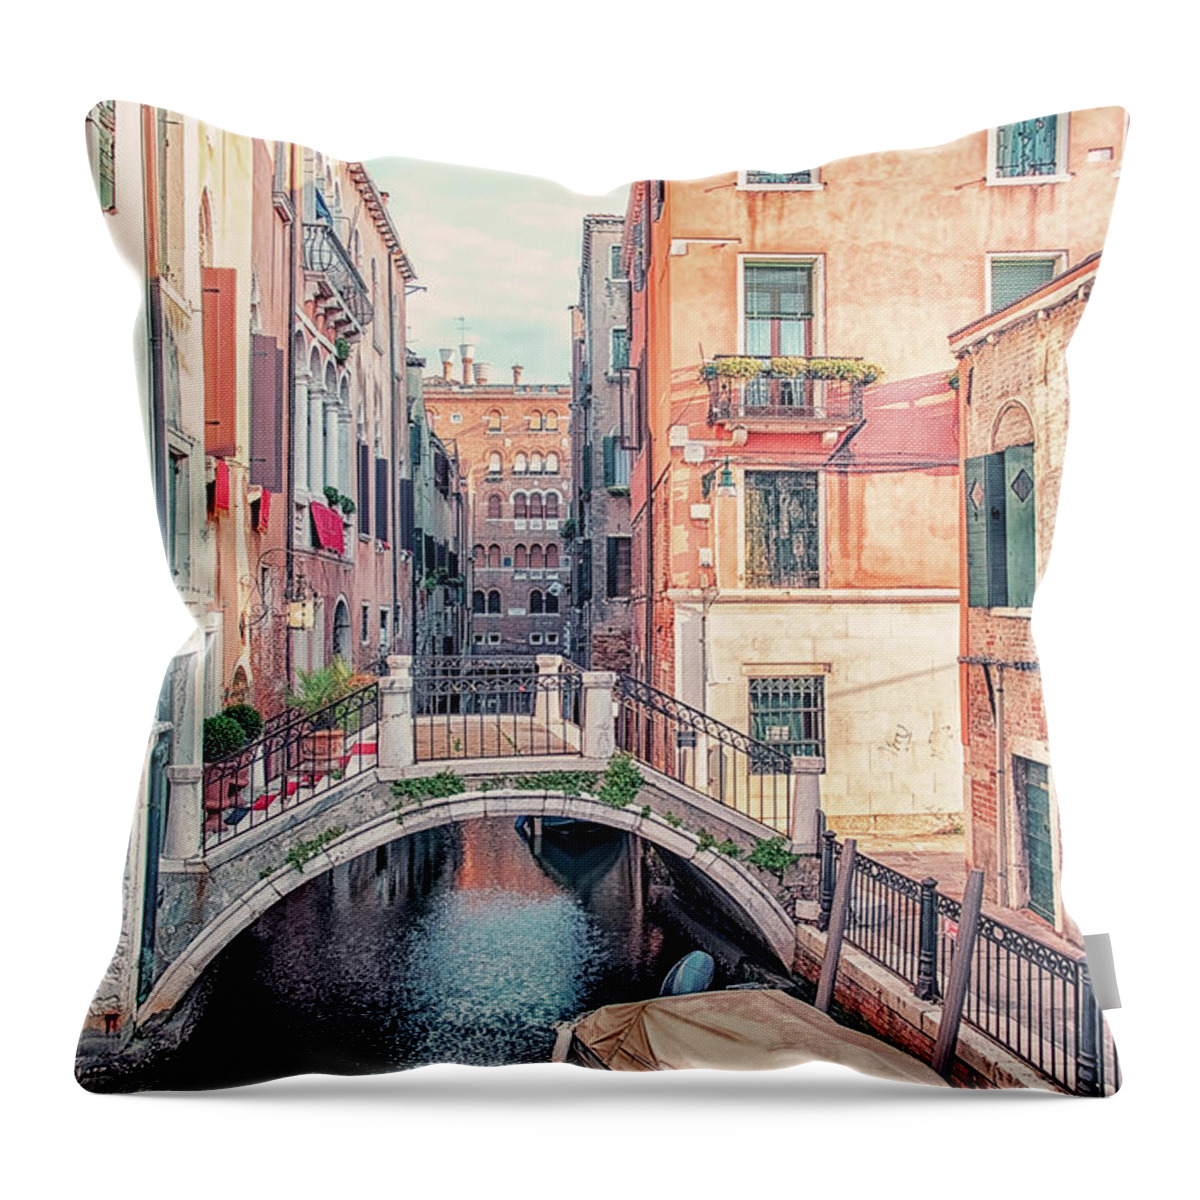 Architecture Throw Pillow featuring the photograph Venice City by Manjik Pictures